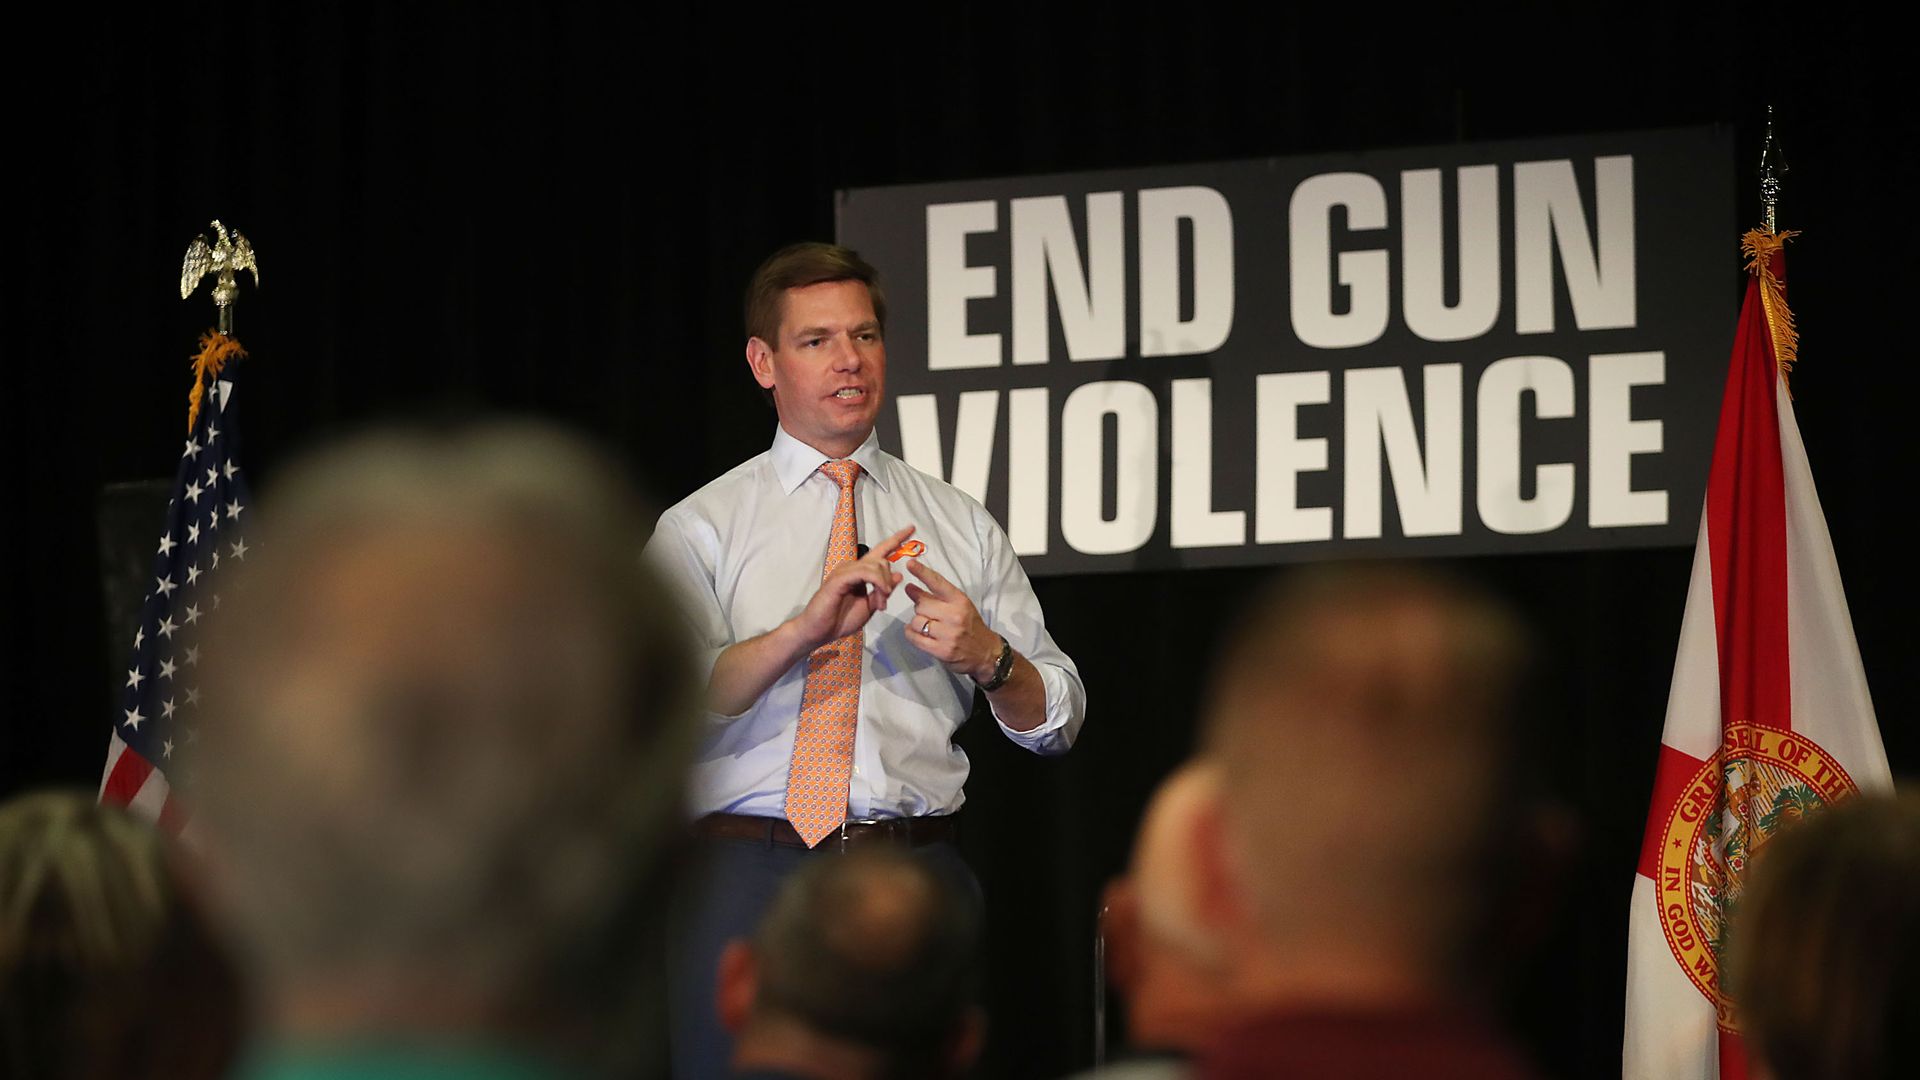 Rep. Eric Swalwell campaigning to end gun violence